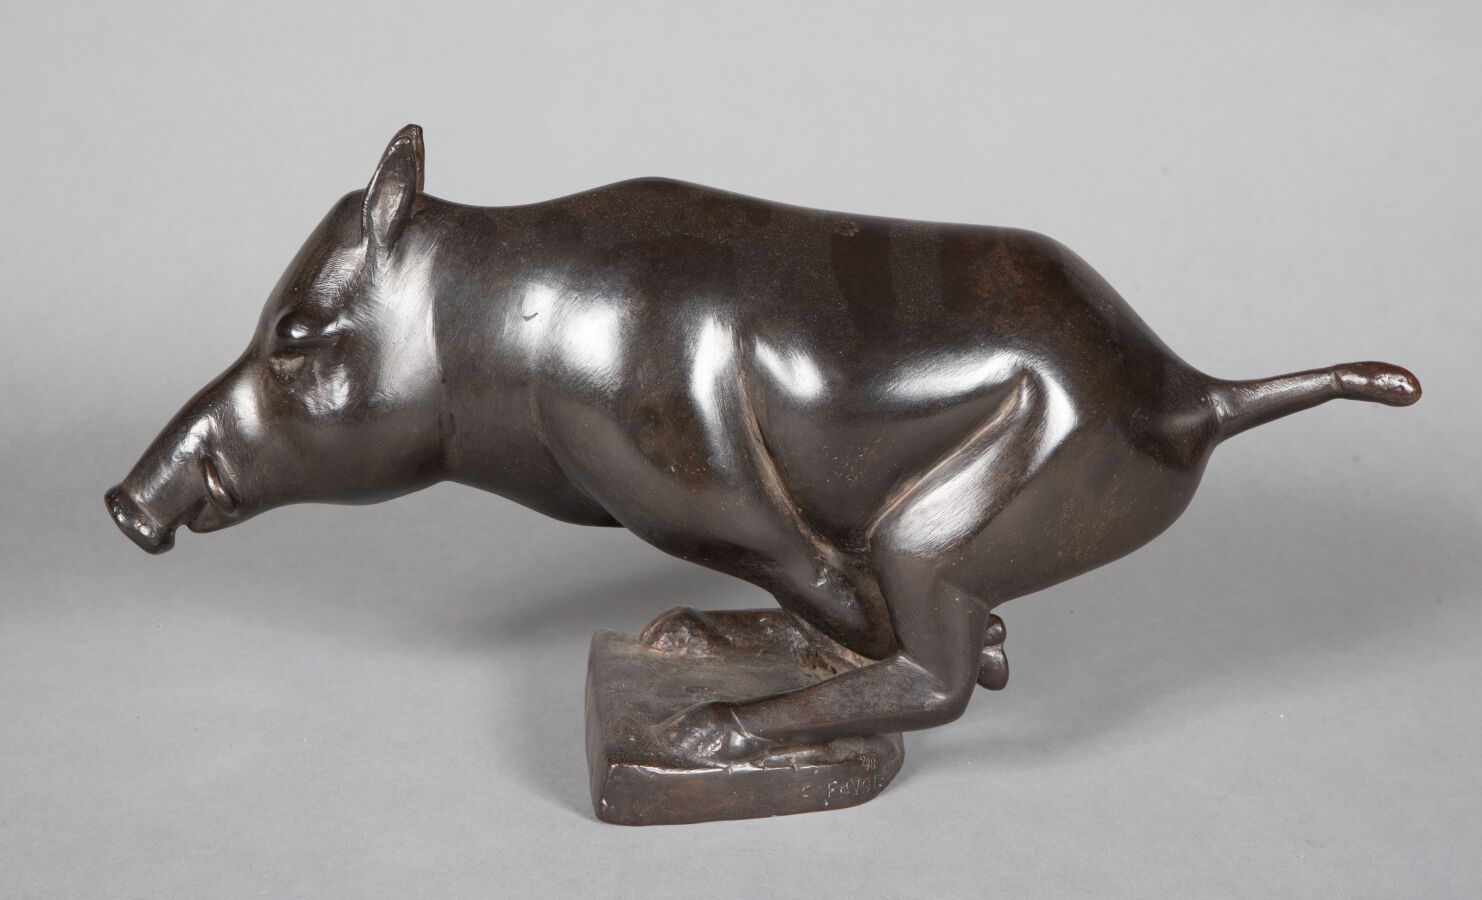 Null C. FAVARD 

"Boar". Proof in bronze with brown shaded patina. Lost wax cast&hellip;